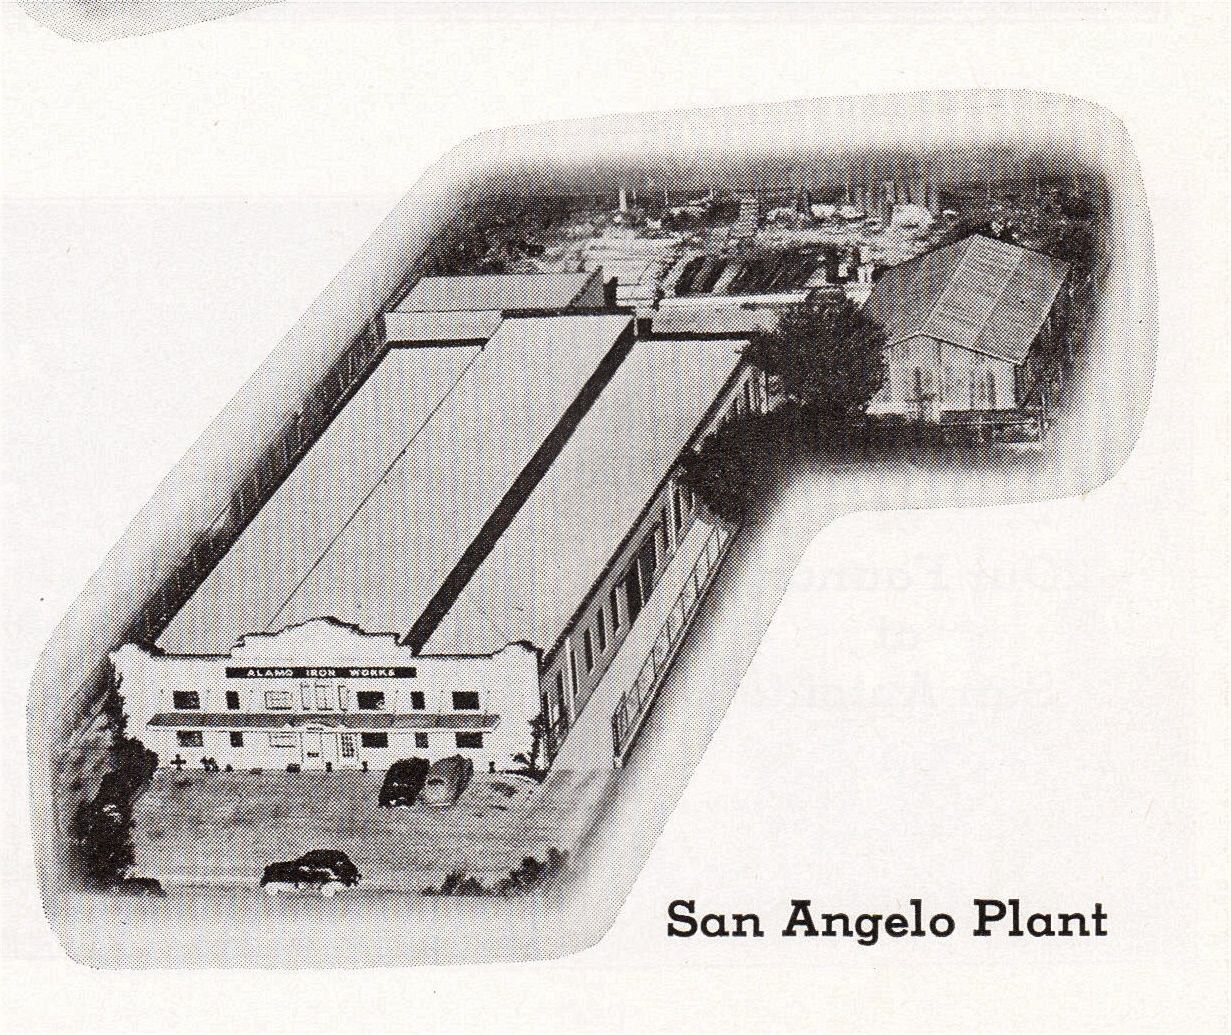 Where can you learn more about Alamo Iron Works?